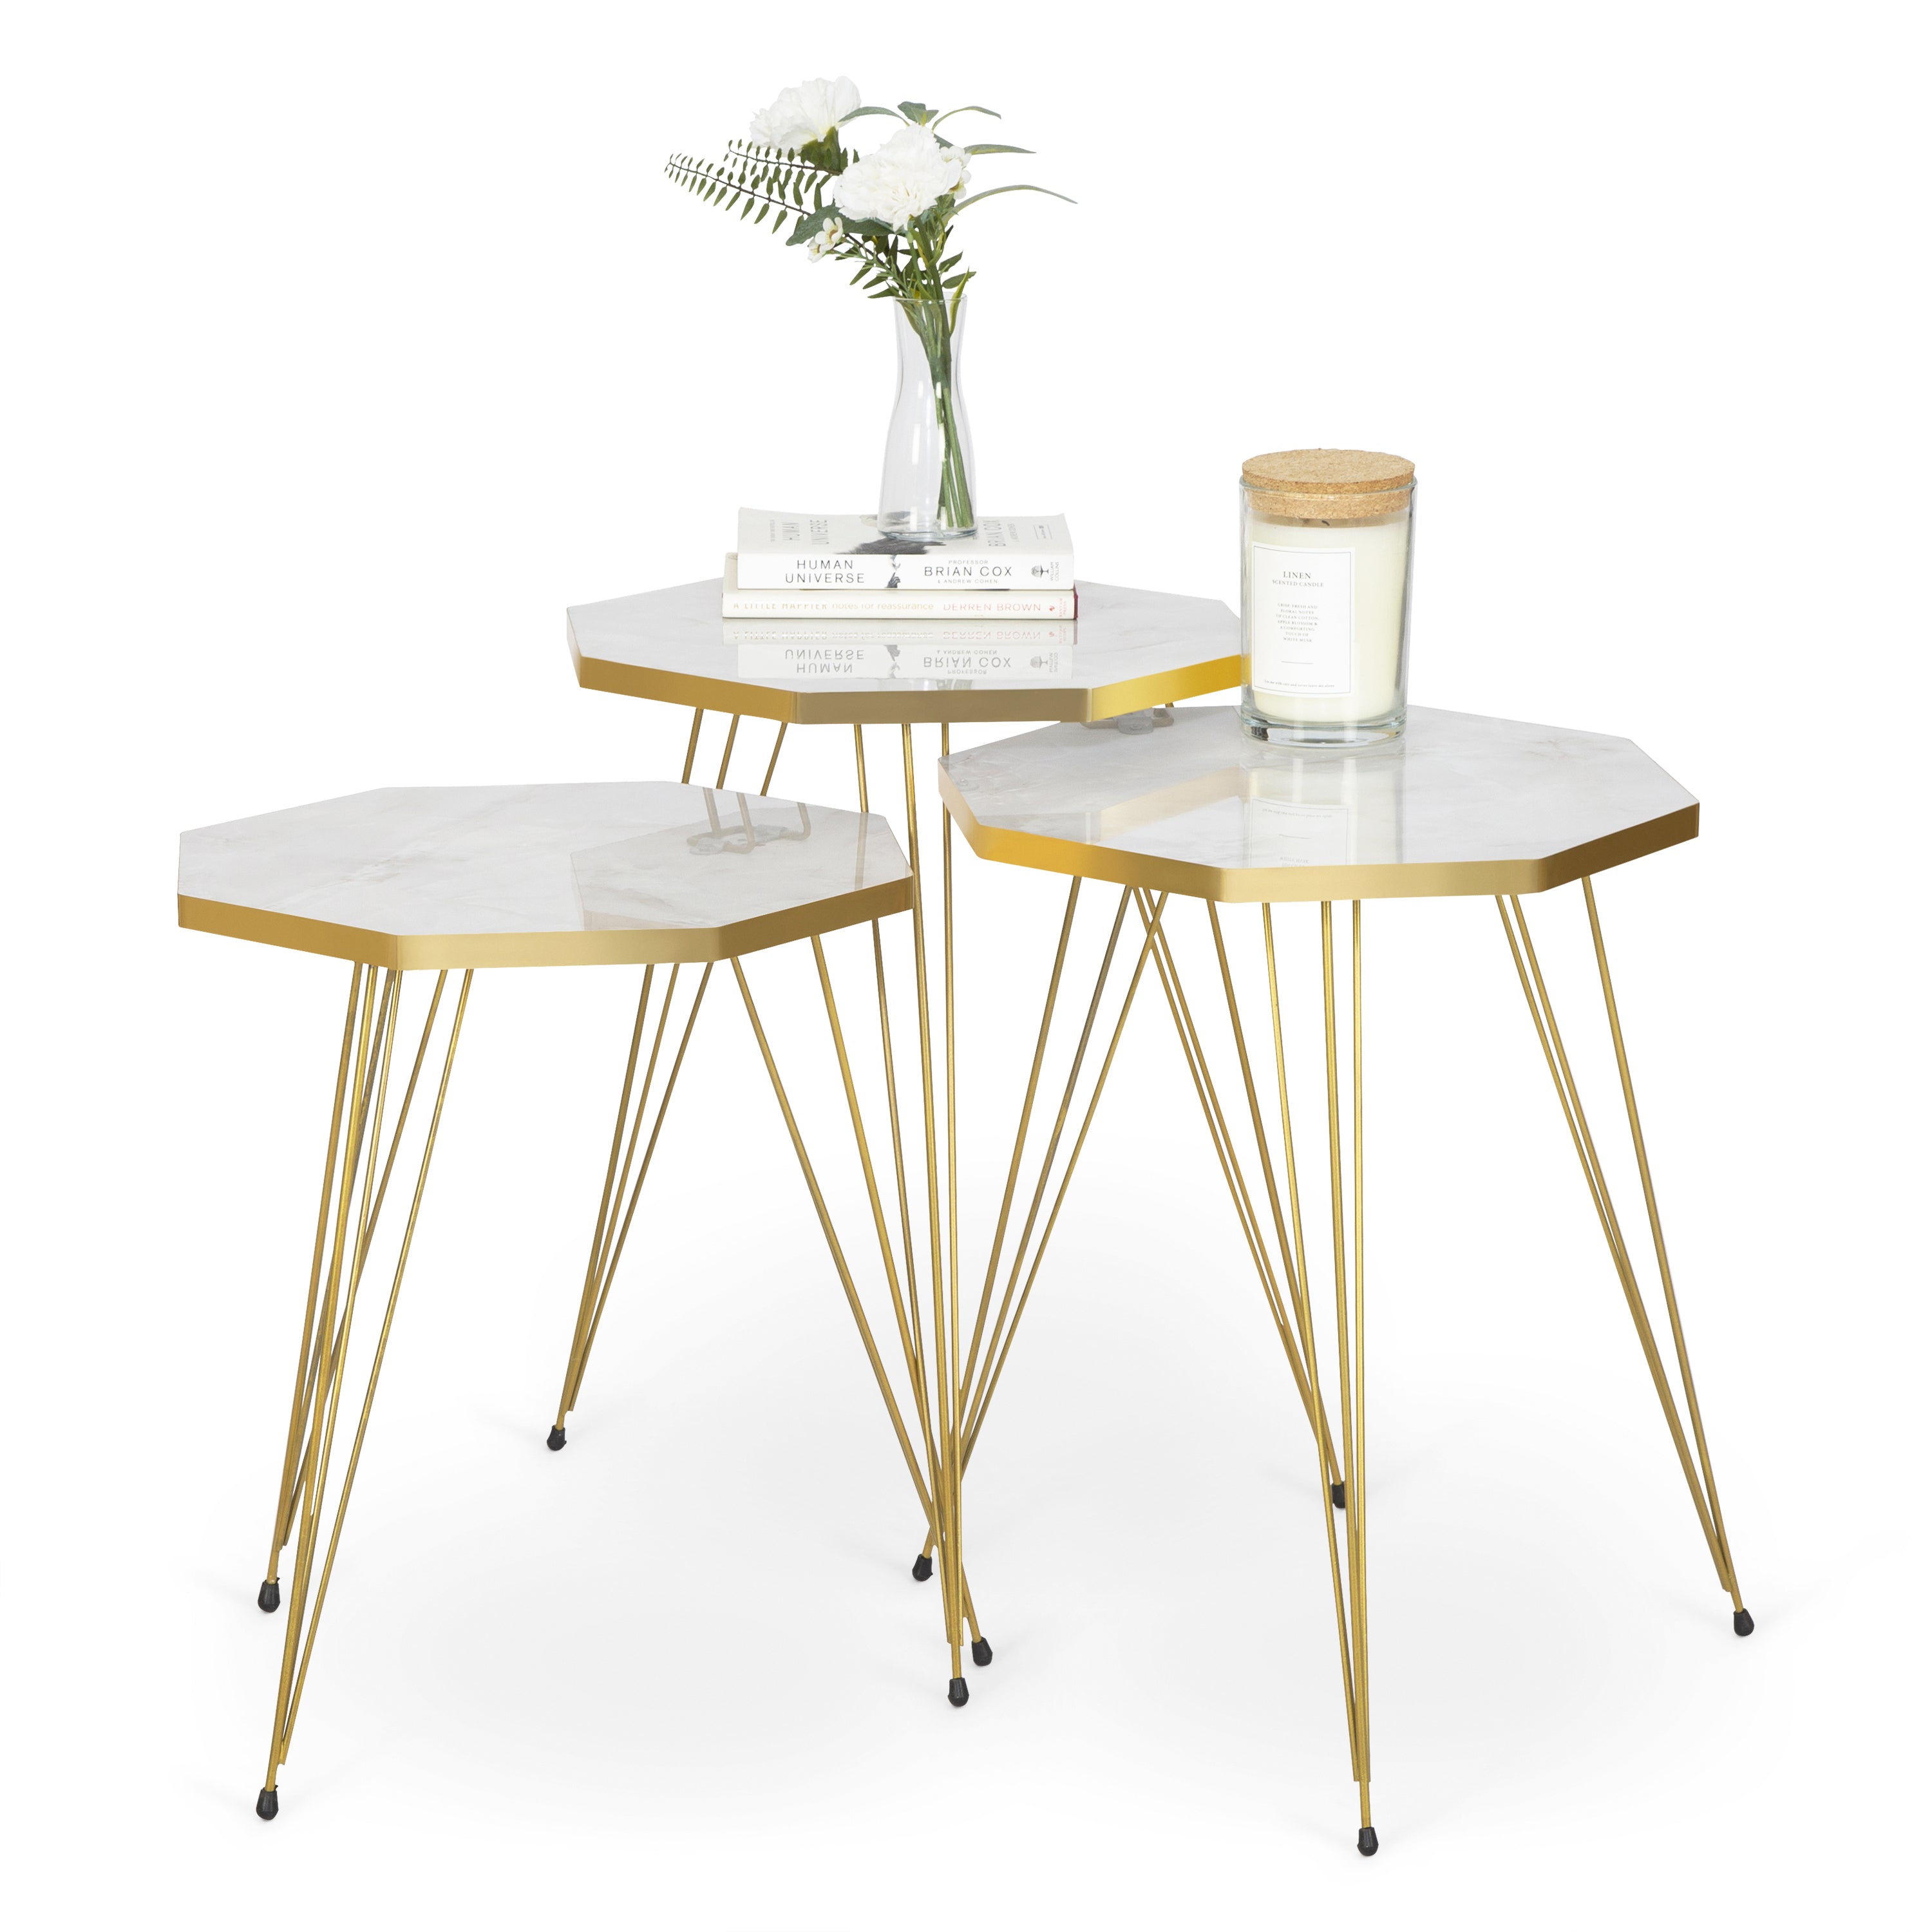 Tigris Set of 3 Octagon Side Tables - White & Gold Marble